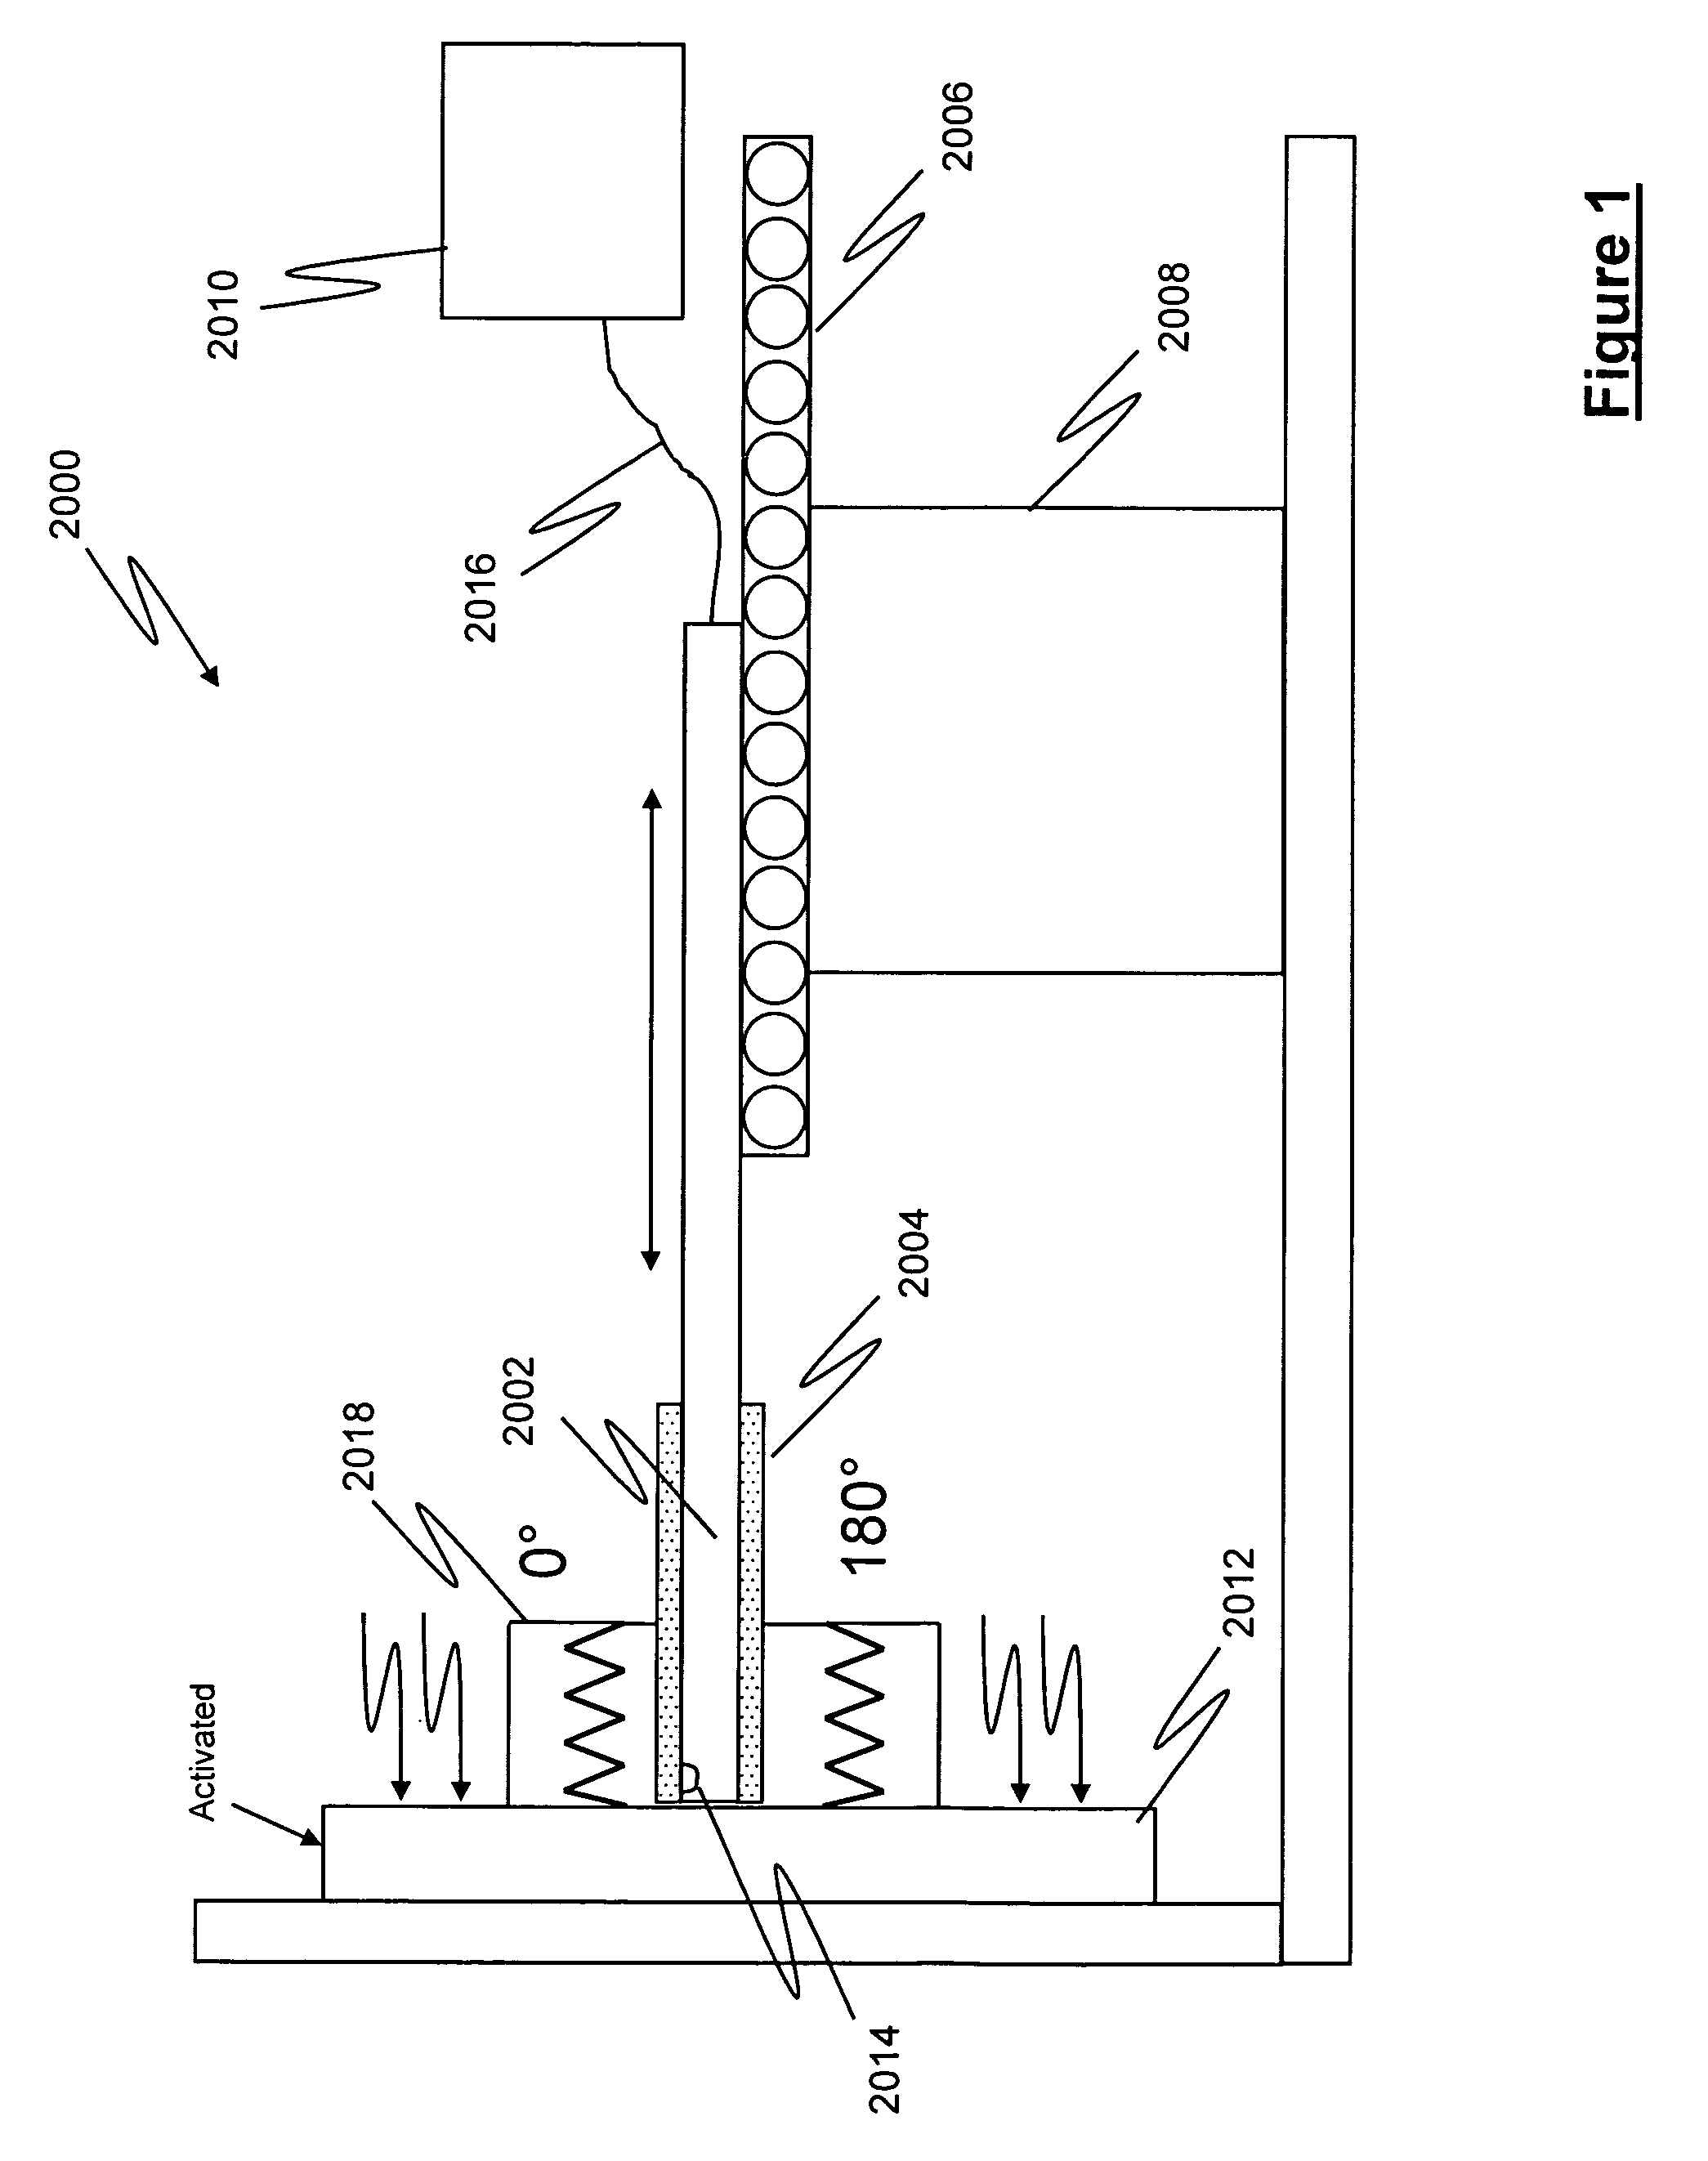 Internal inspection system and method